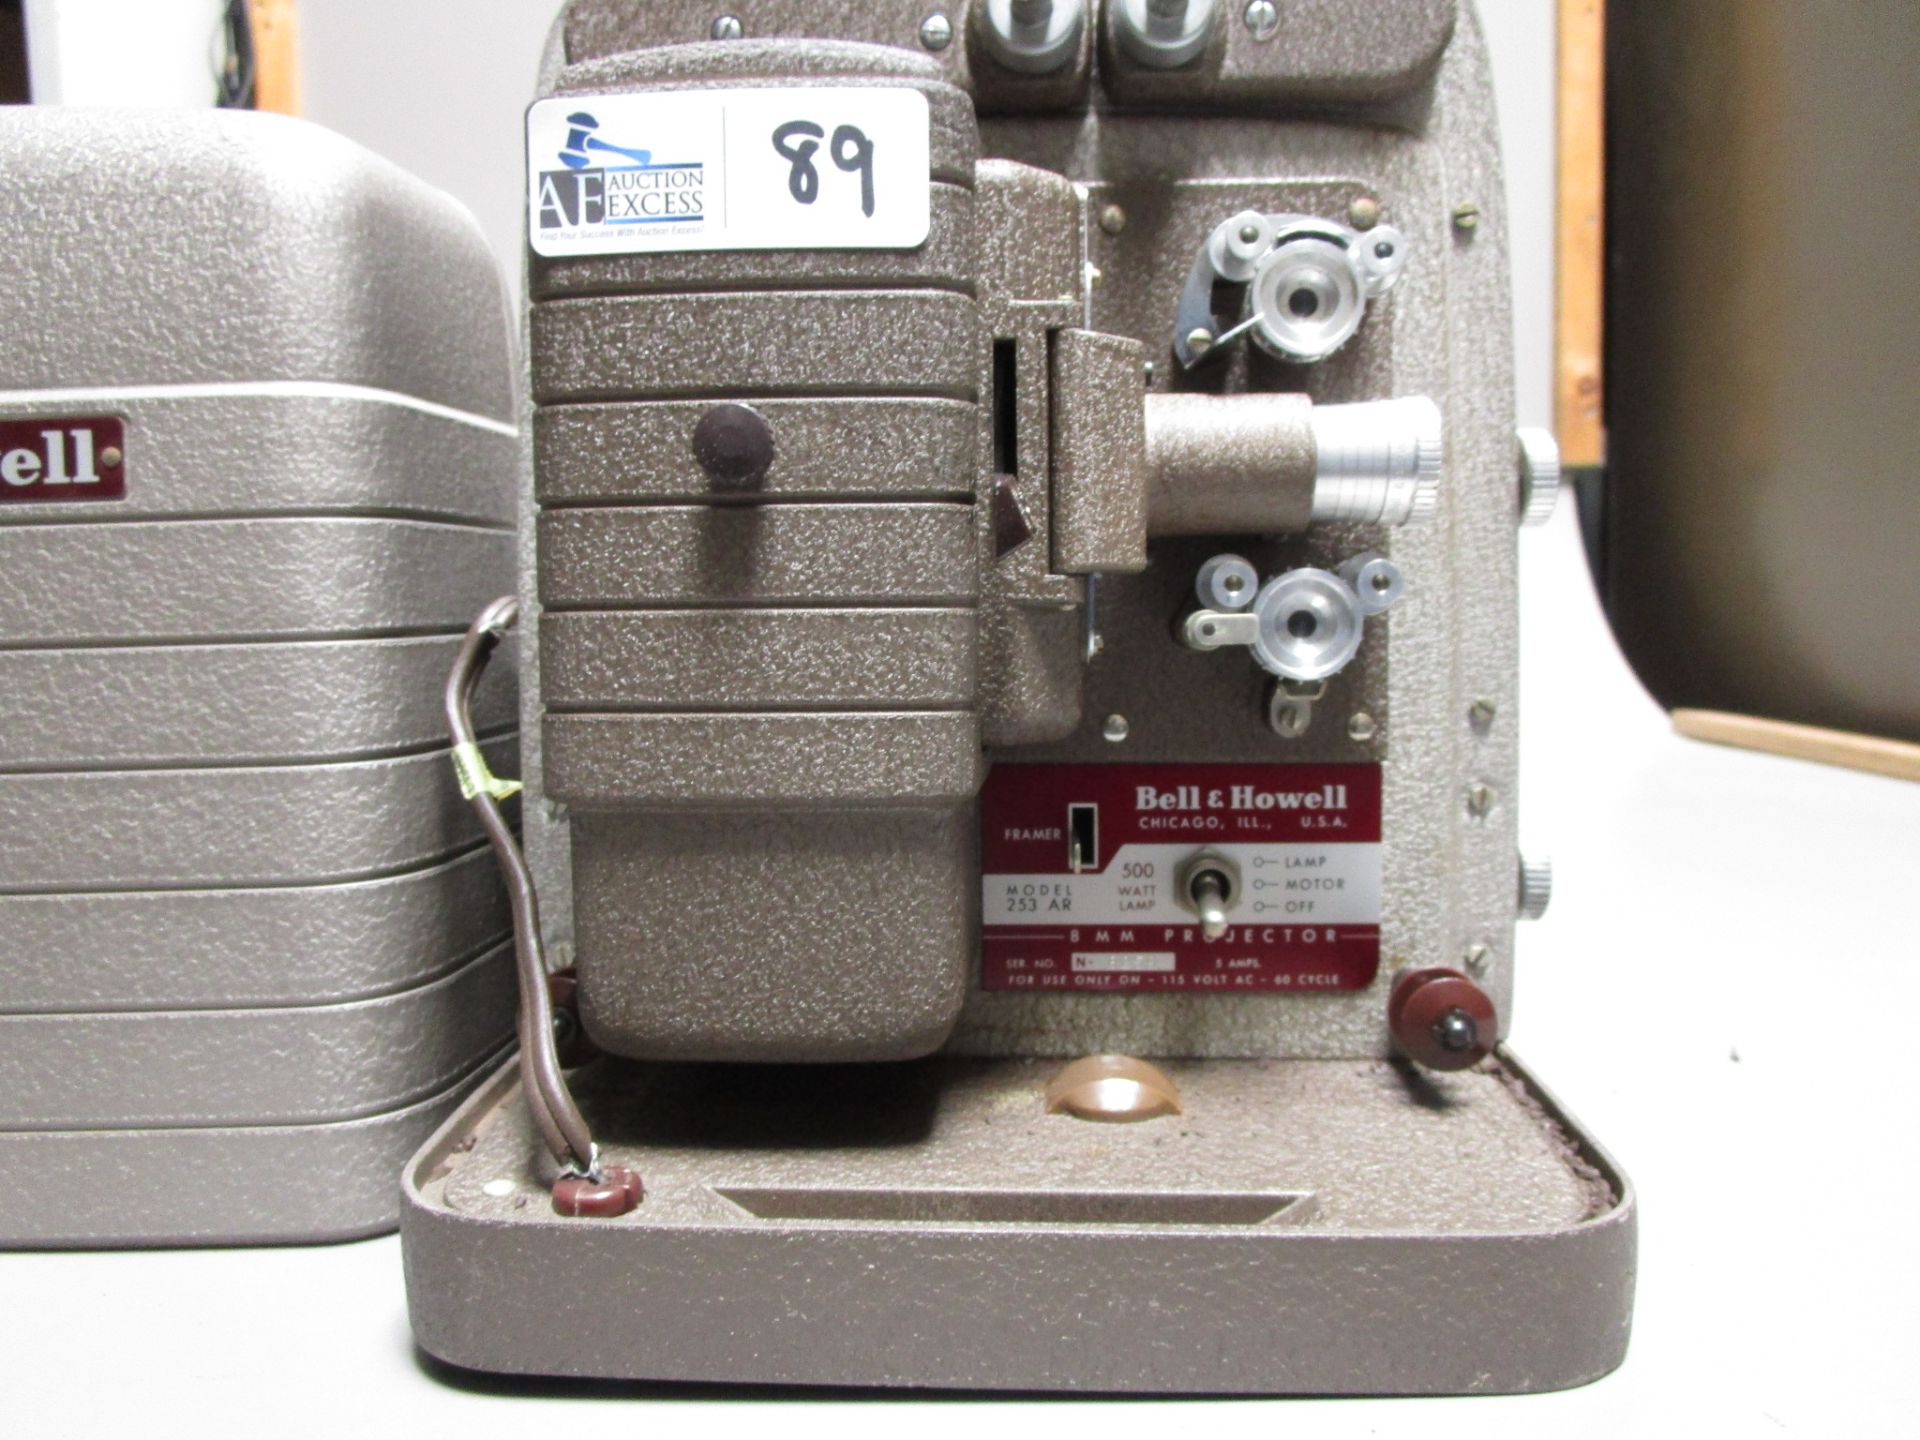 BELL & HOWELL PROJECTOR - Image 2 of 2